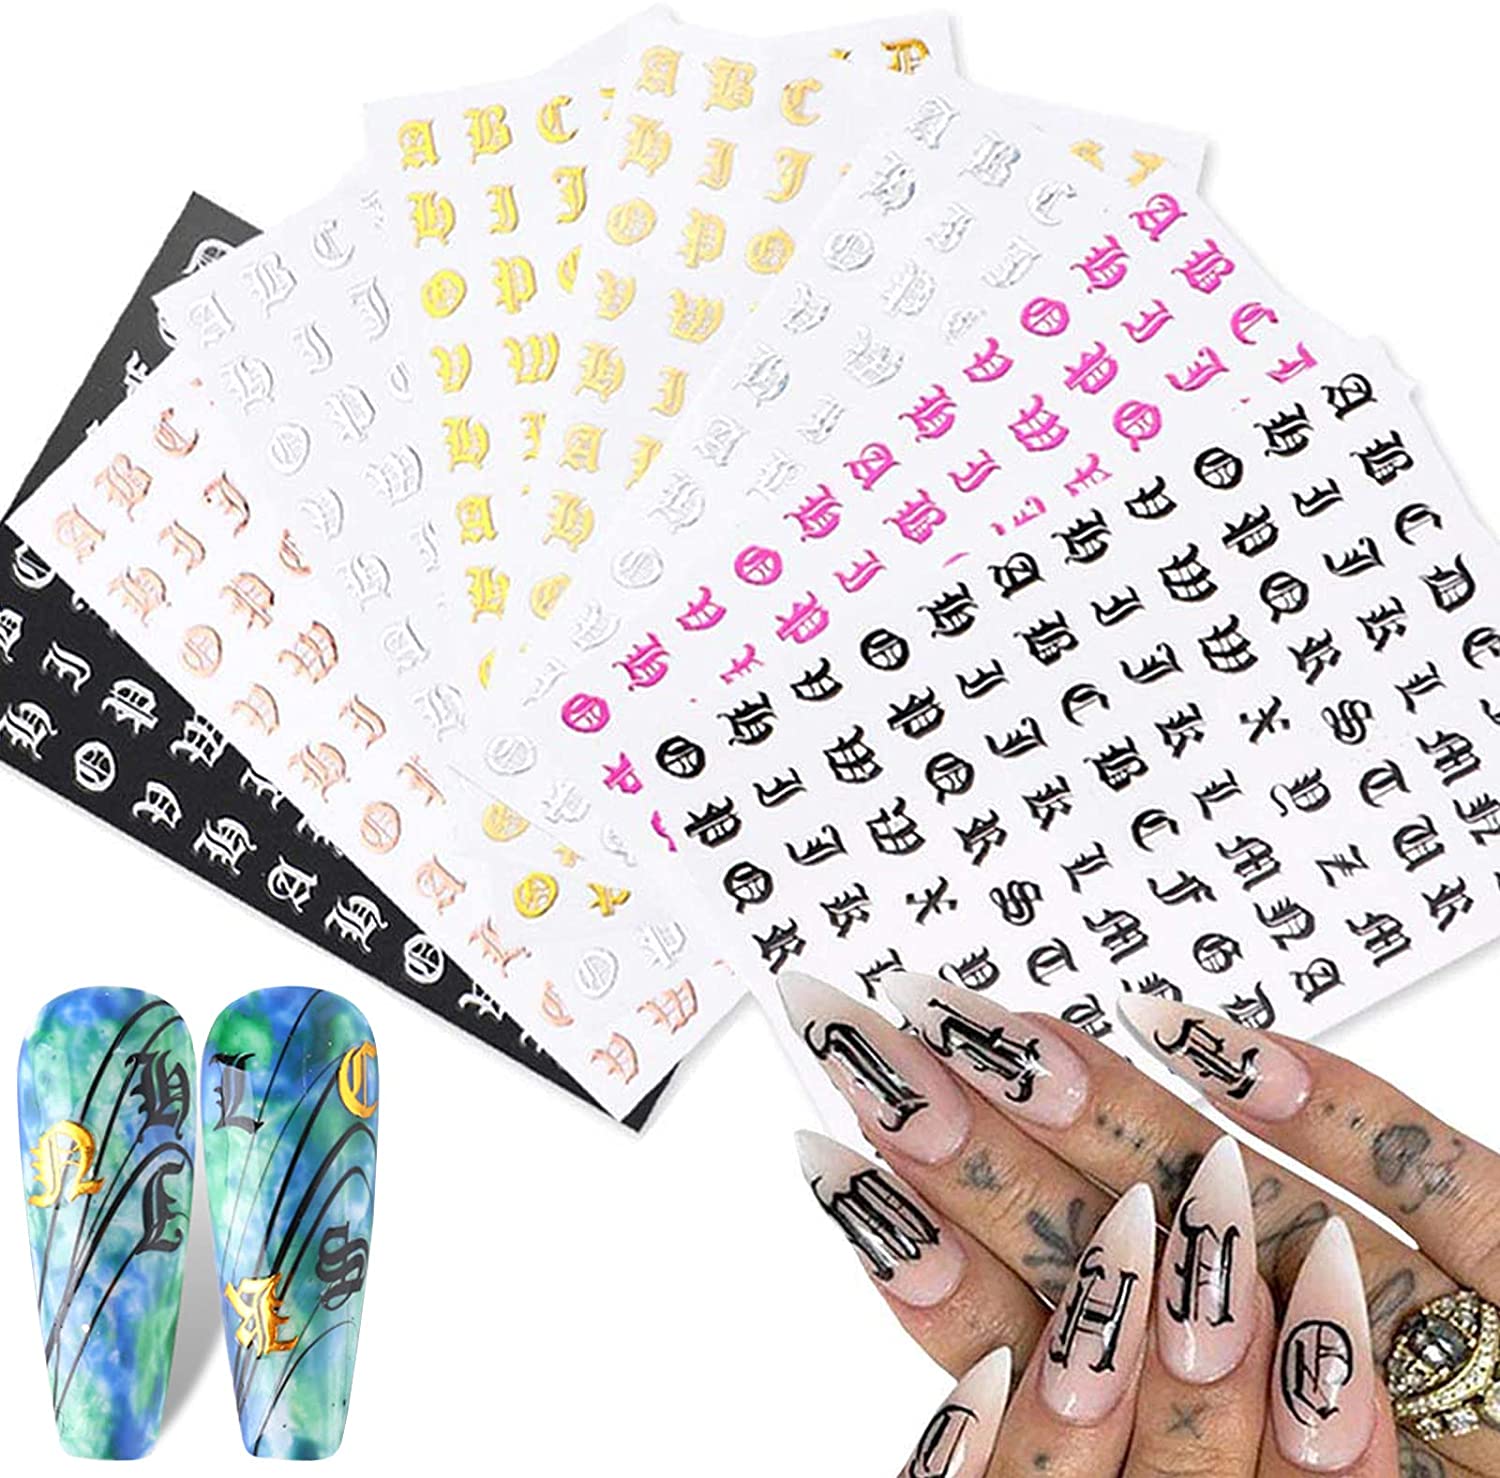 Letter Nail Art Stickers 3D Letters Nail Stickers Nail Art Supplies Old English Alphabet Nail Decals Holographic Letter Nail Designs Kit English Font Nail Sticker for Acrylic Nails (12 Sheets)